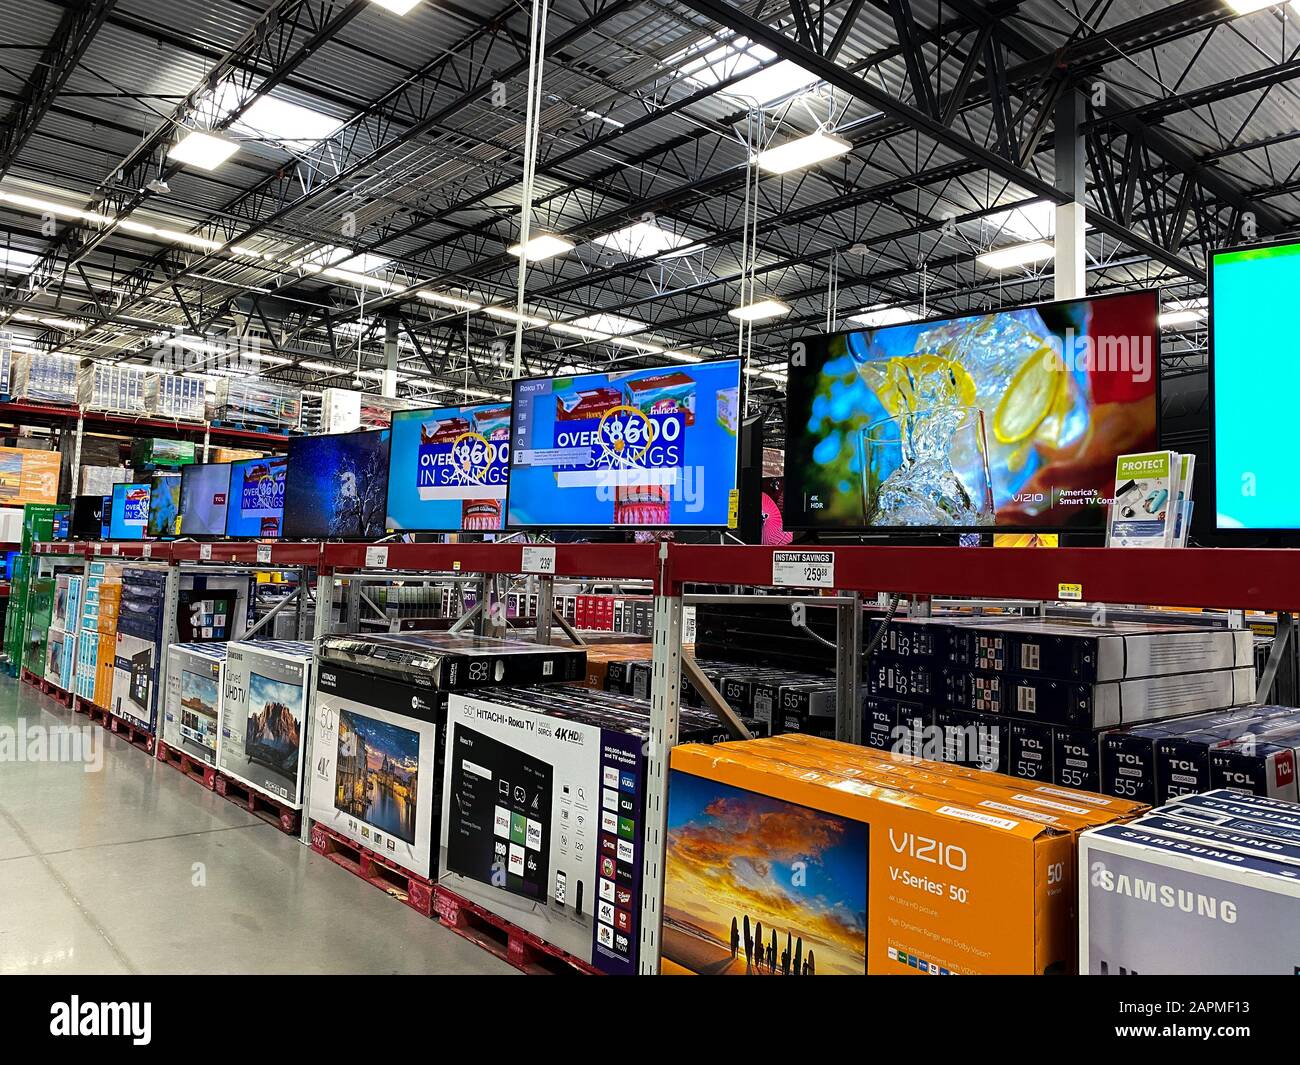 Orlando,FL/USA -1/23/20:  The TV aisle of a Sams Club Wholesale retail store with a variety of television ready to be purchased by consumers. Stock Photo